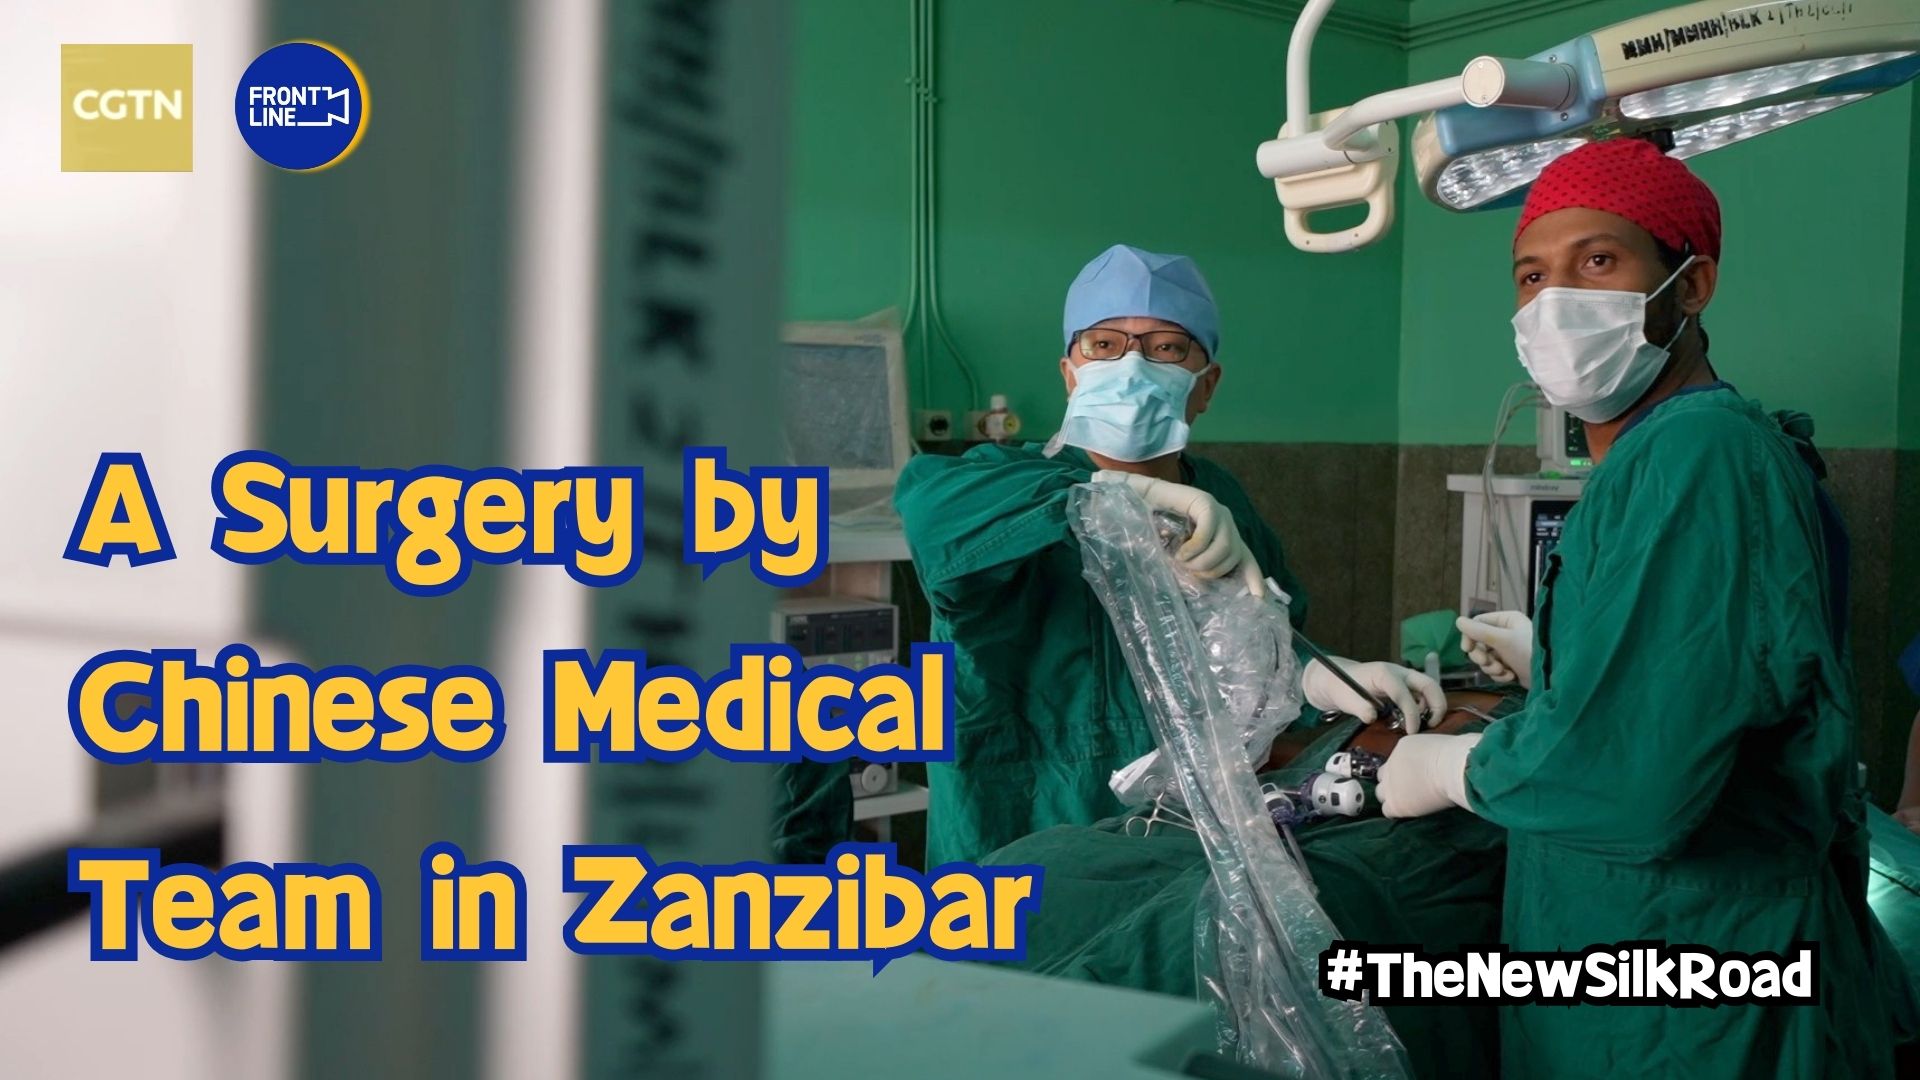 A surgery by the Chinese medical team in Zanzibar